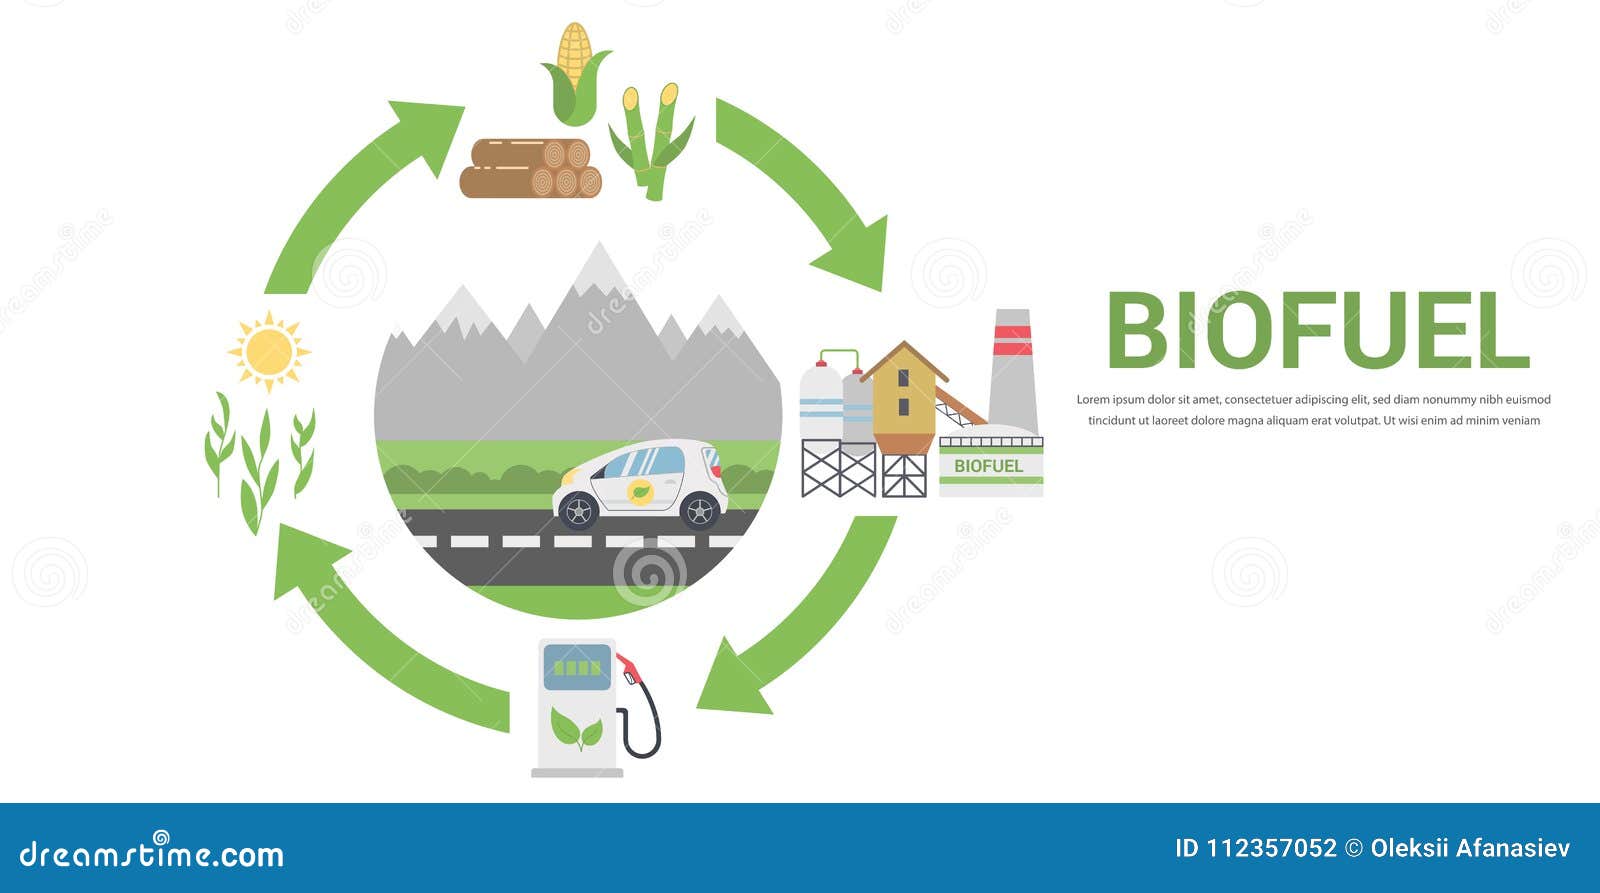 Biofuel life cycle stock vector. Illustration of ...